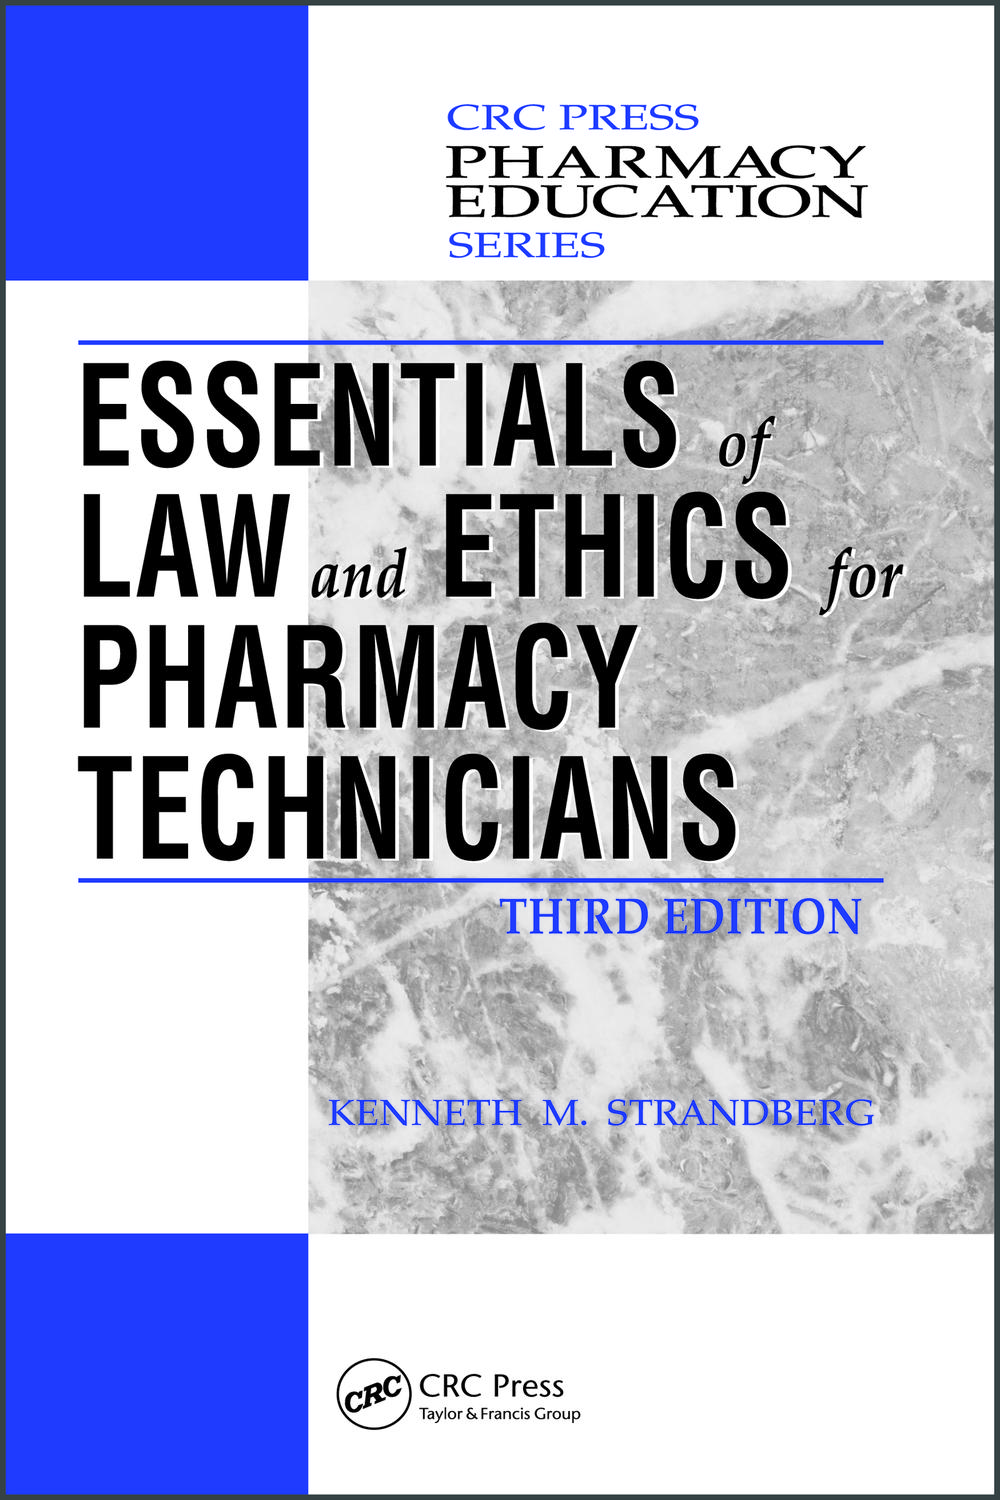 Essentials of Law and Ethics for Pharmacy Technicians - Kenneth M. Strandberg